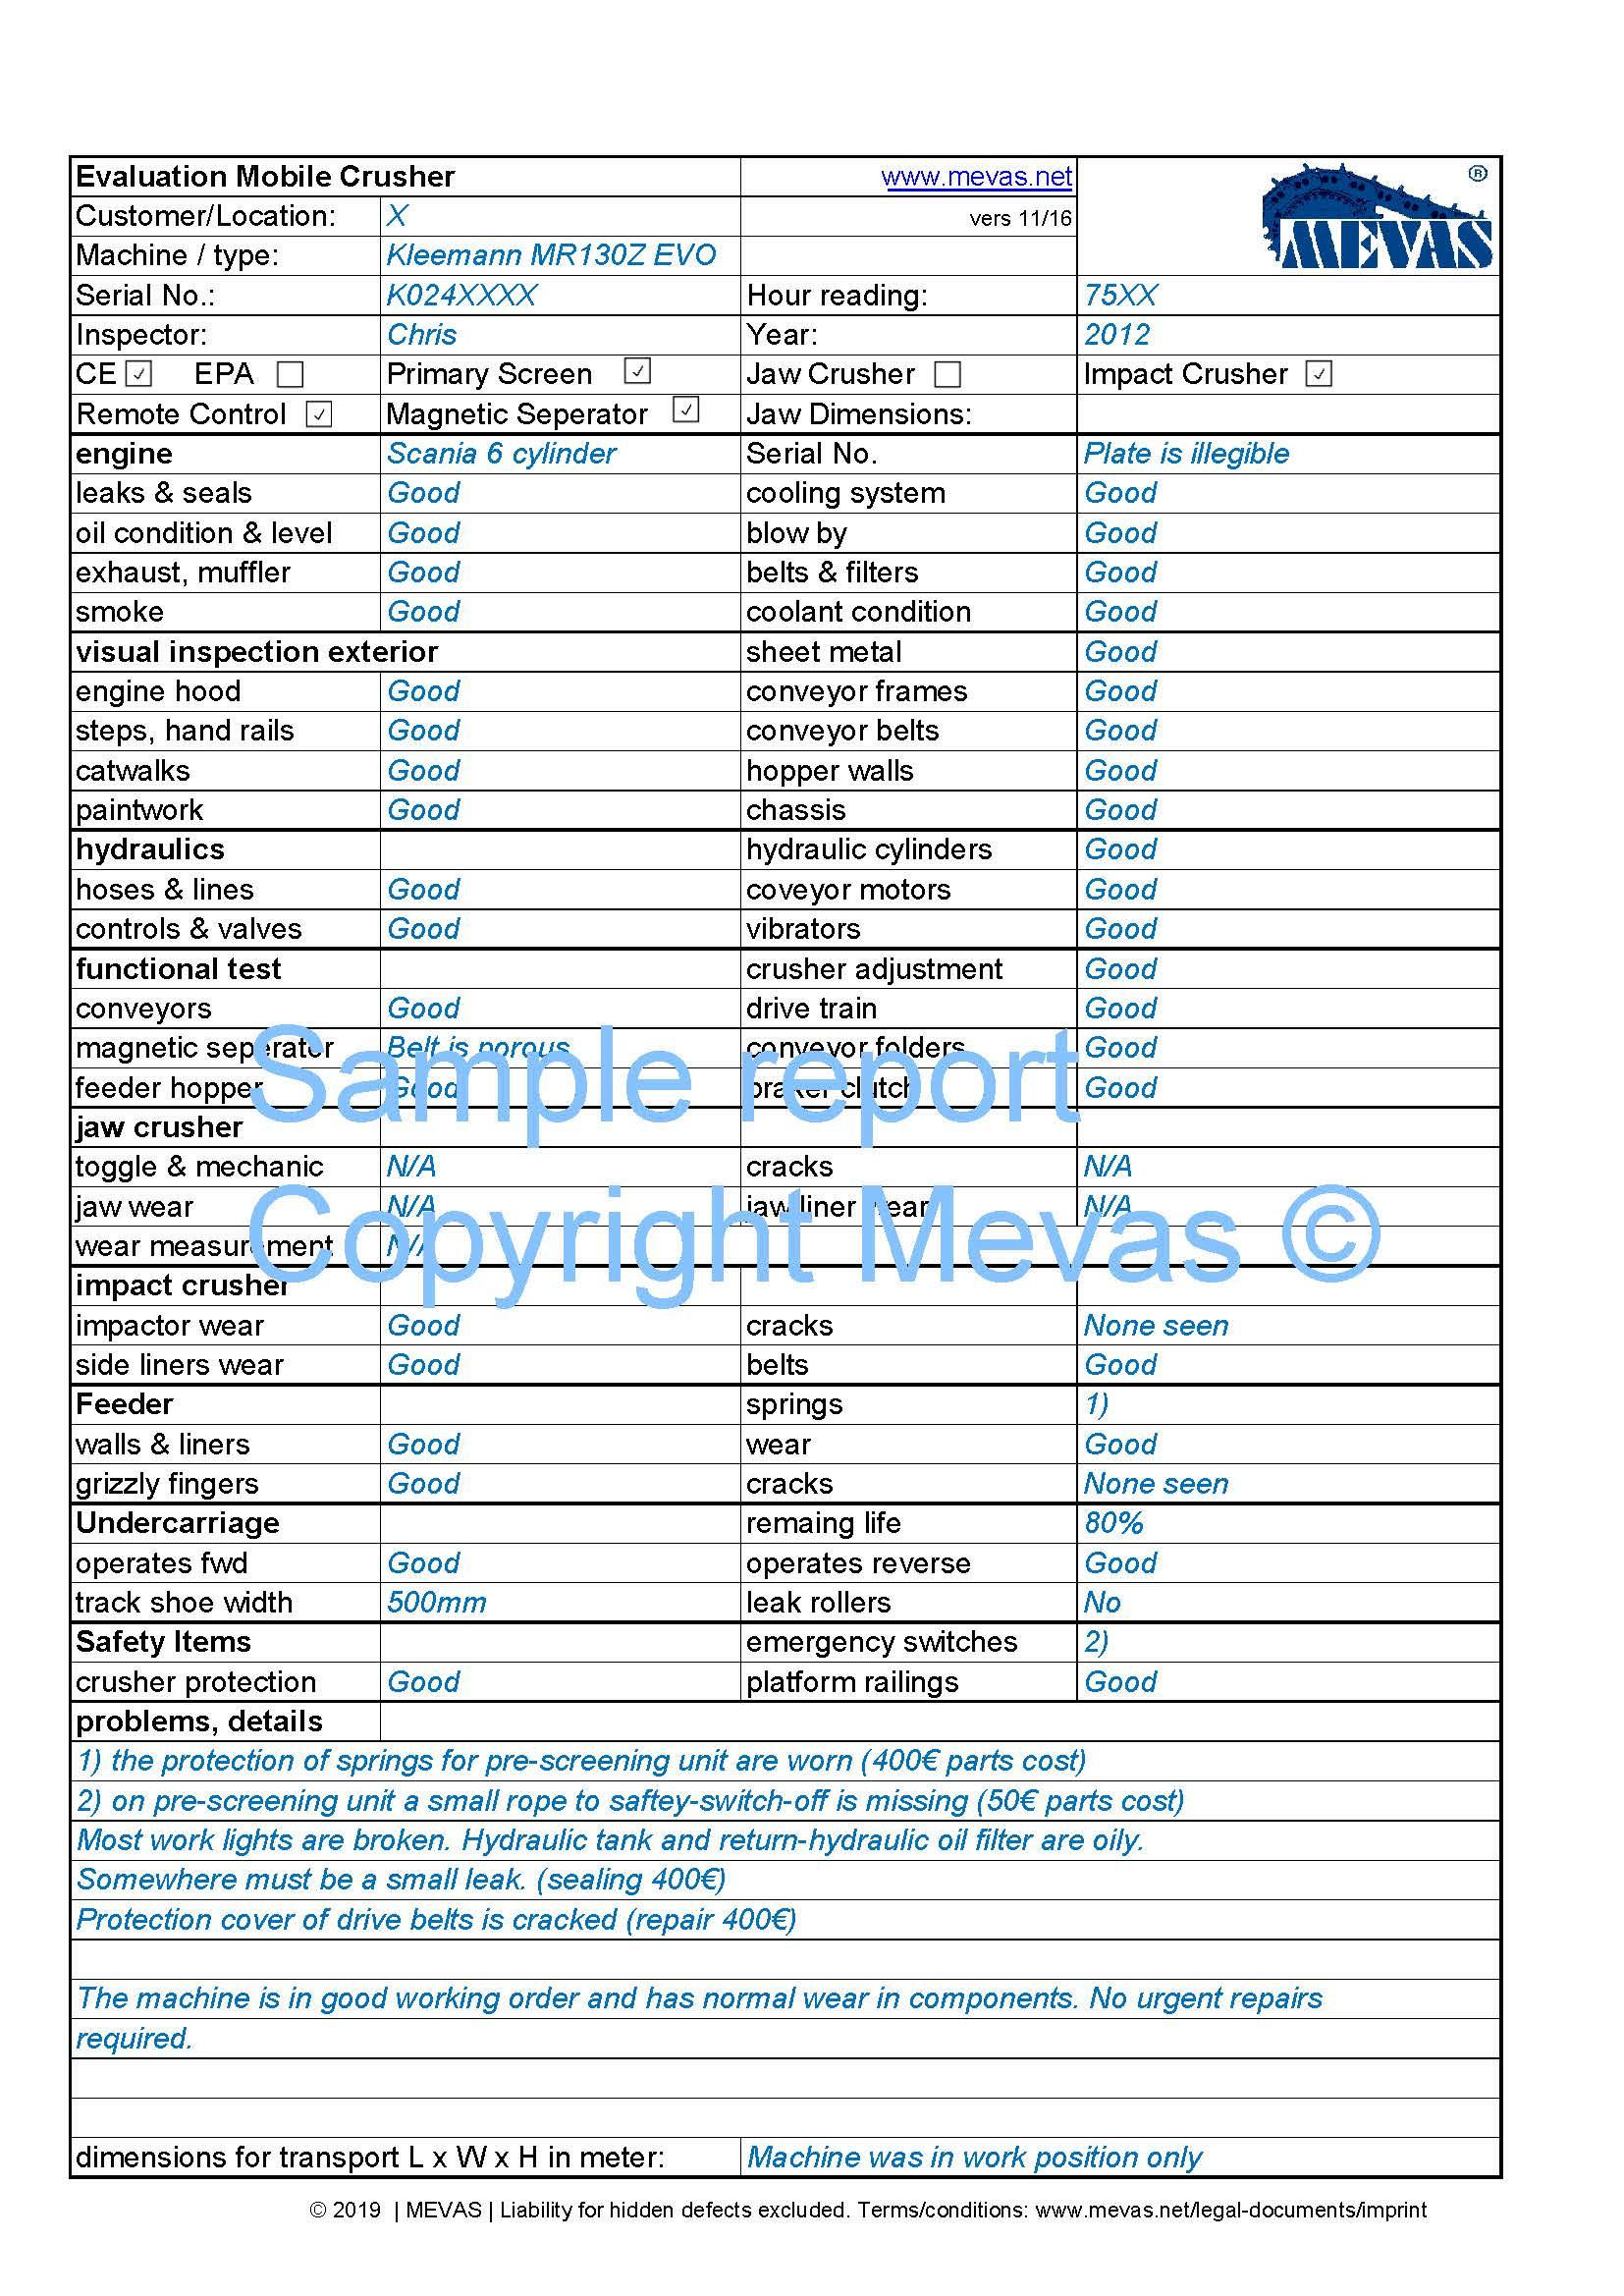 Checklist for rock crusher inspection. Sample of inspection report.